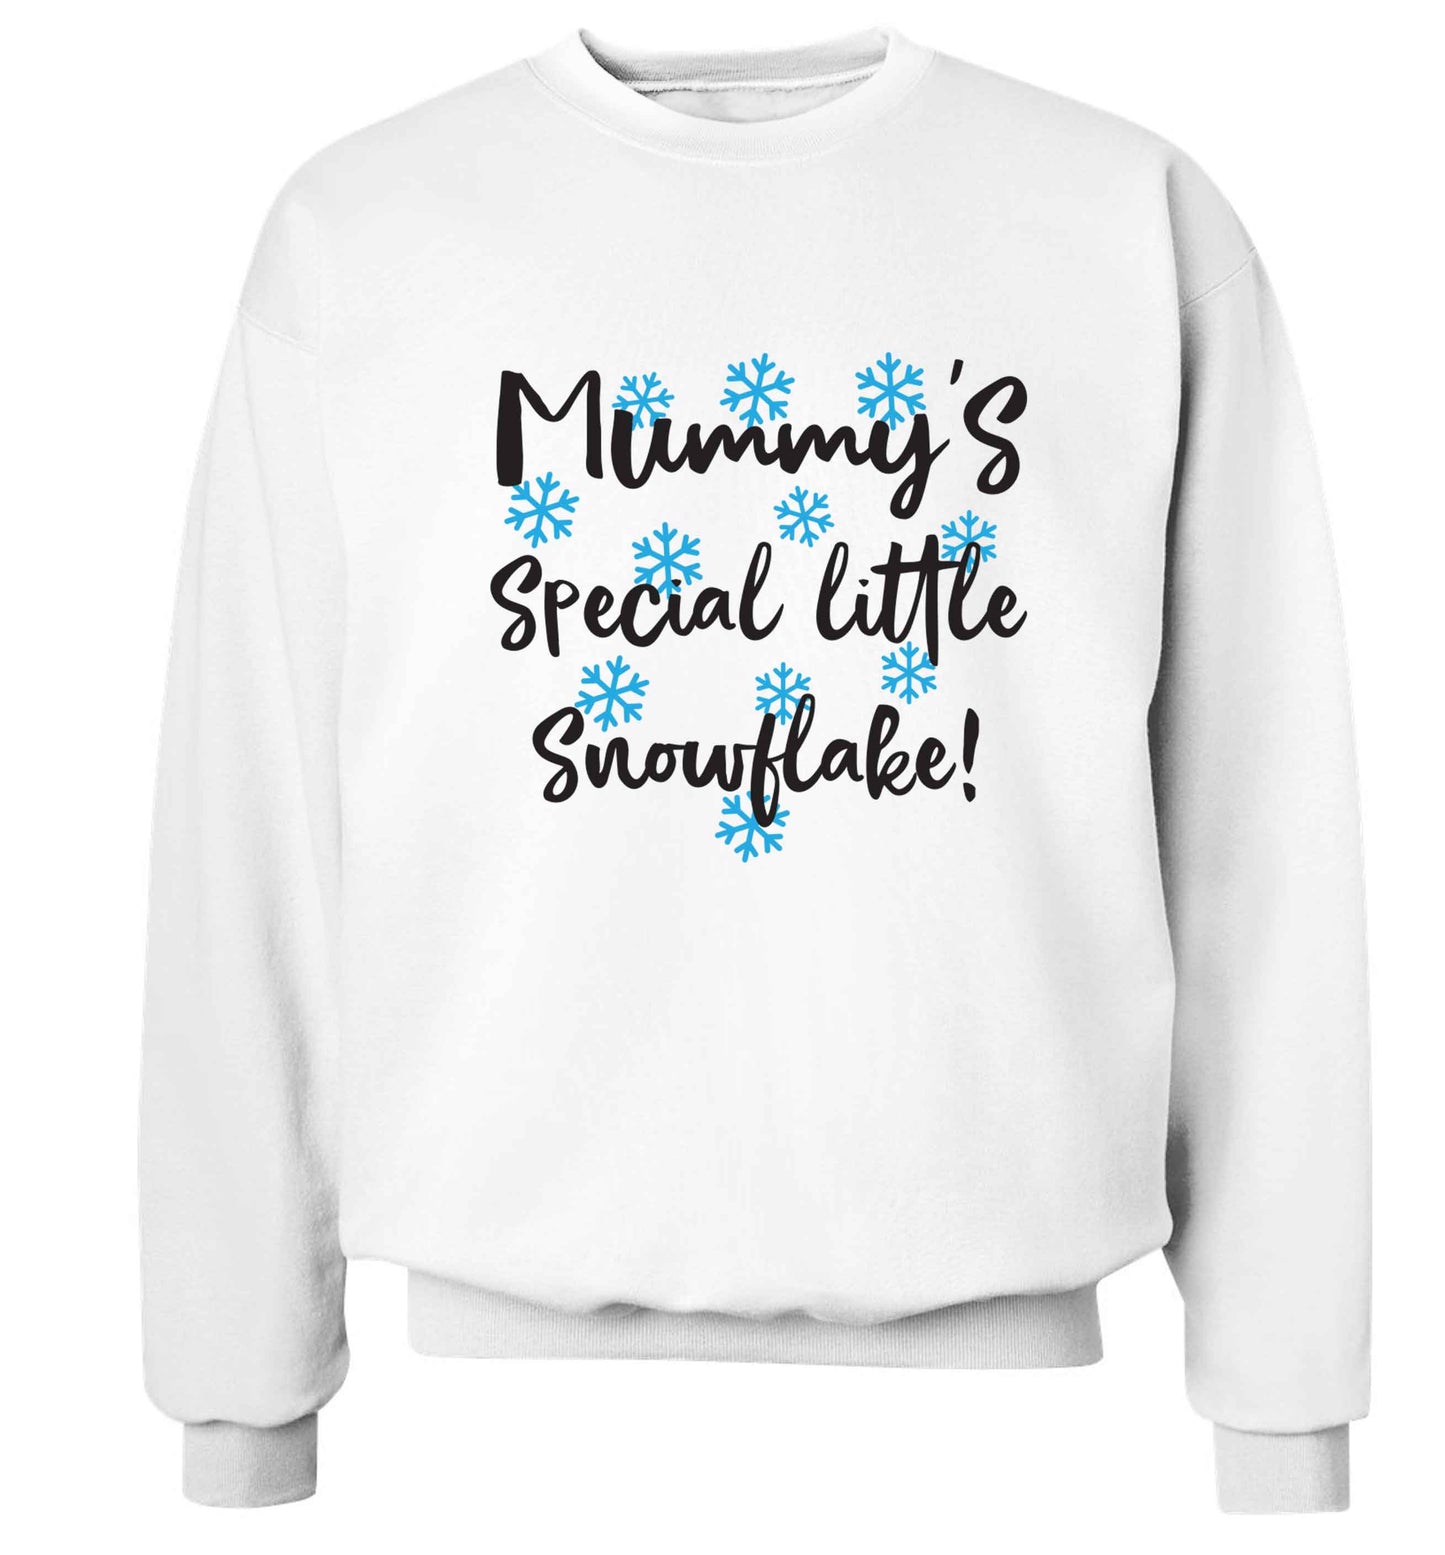 Mummy's special little snowflake Adult's unisex white Sweater 2XL